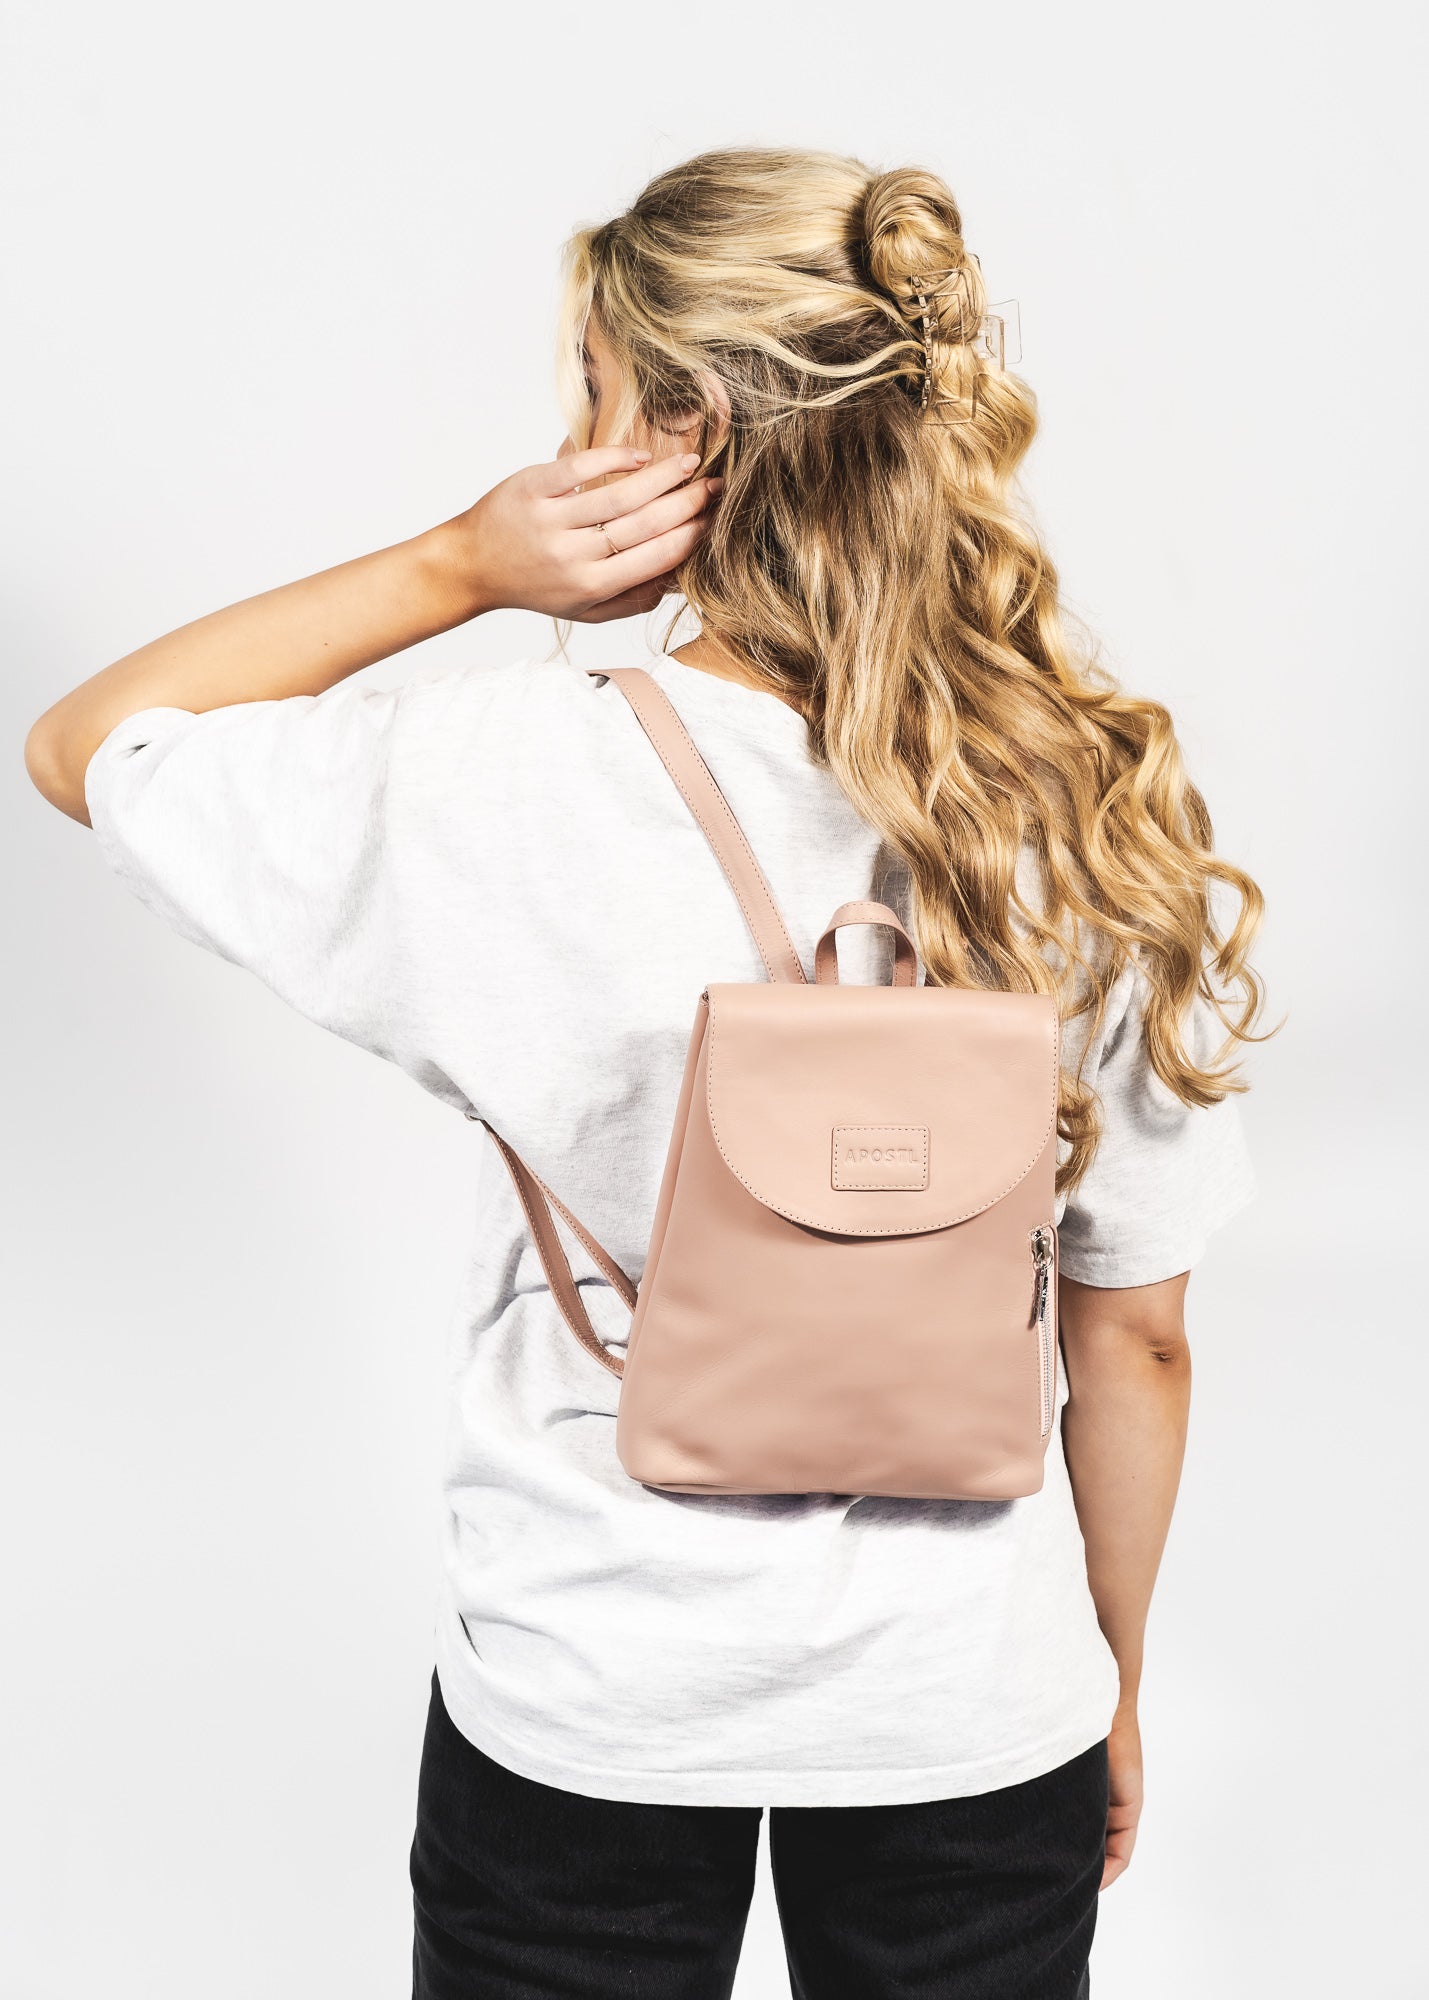 Silas Backpack - Nude -